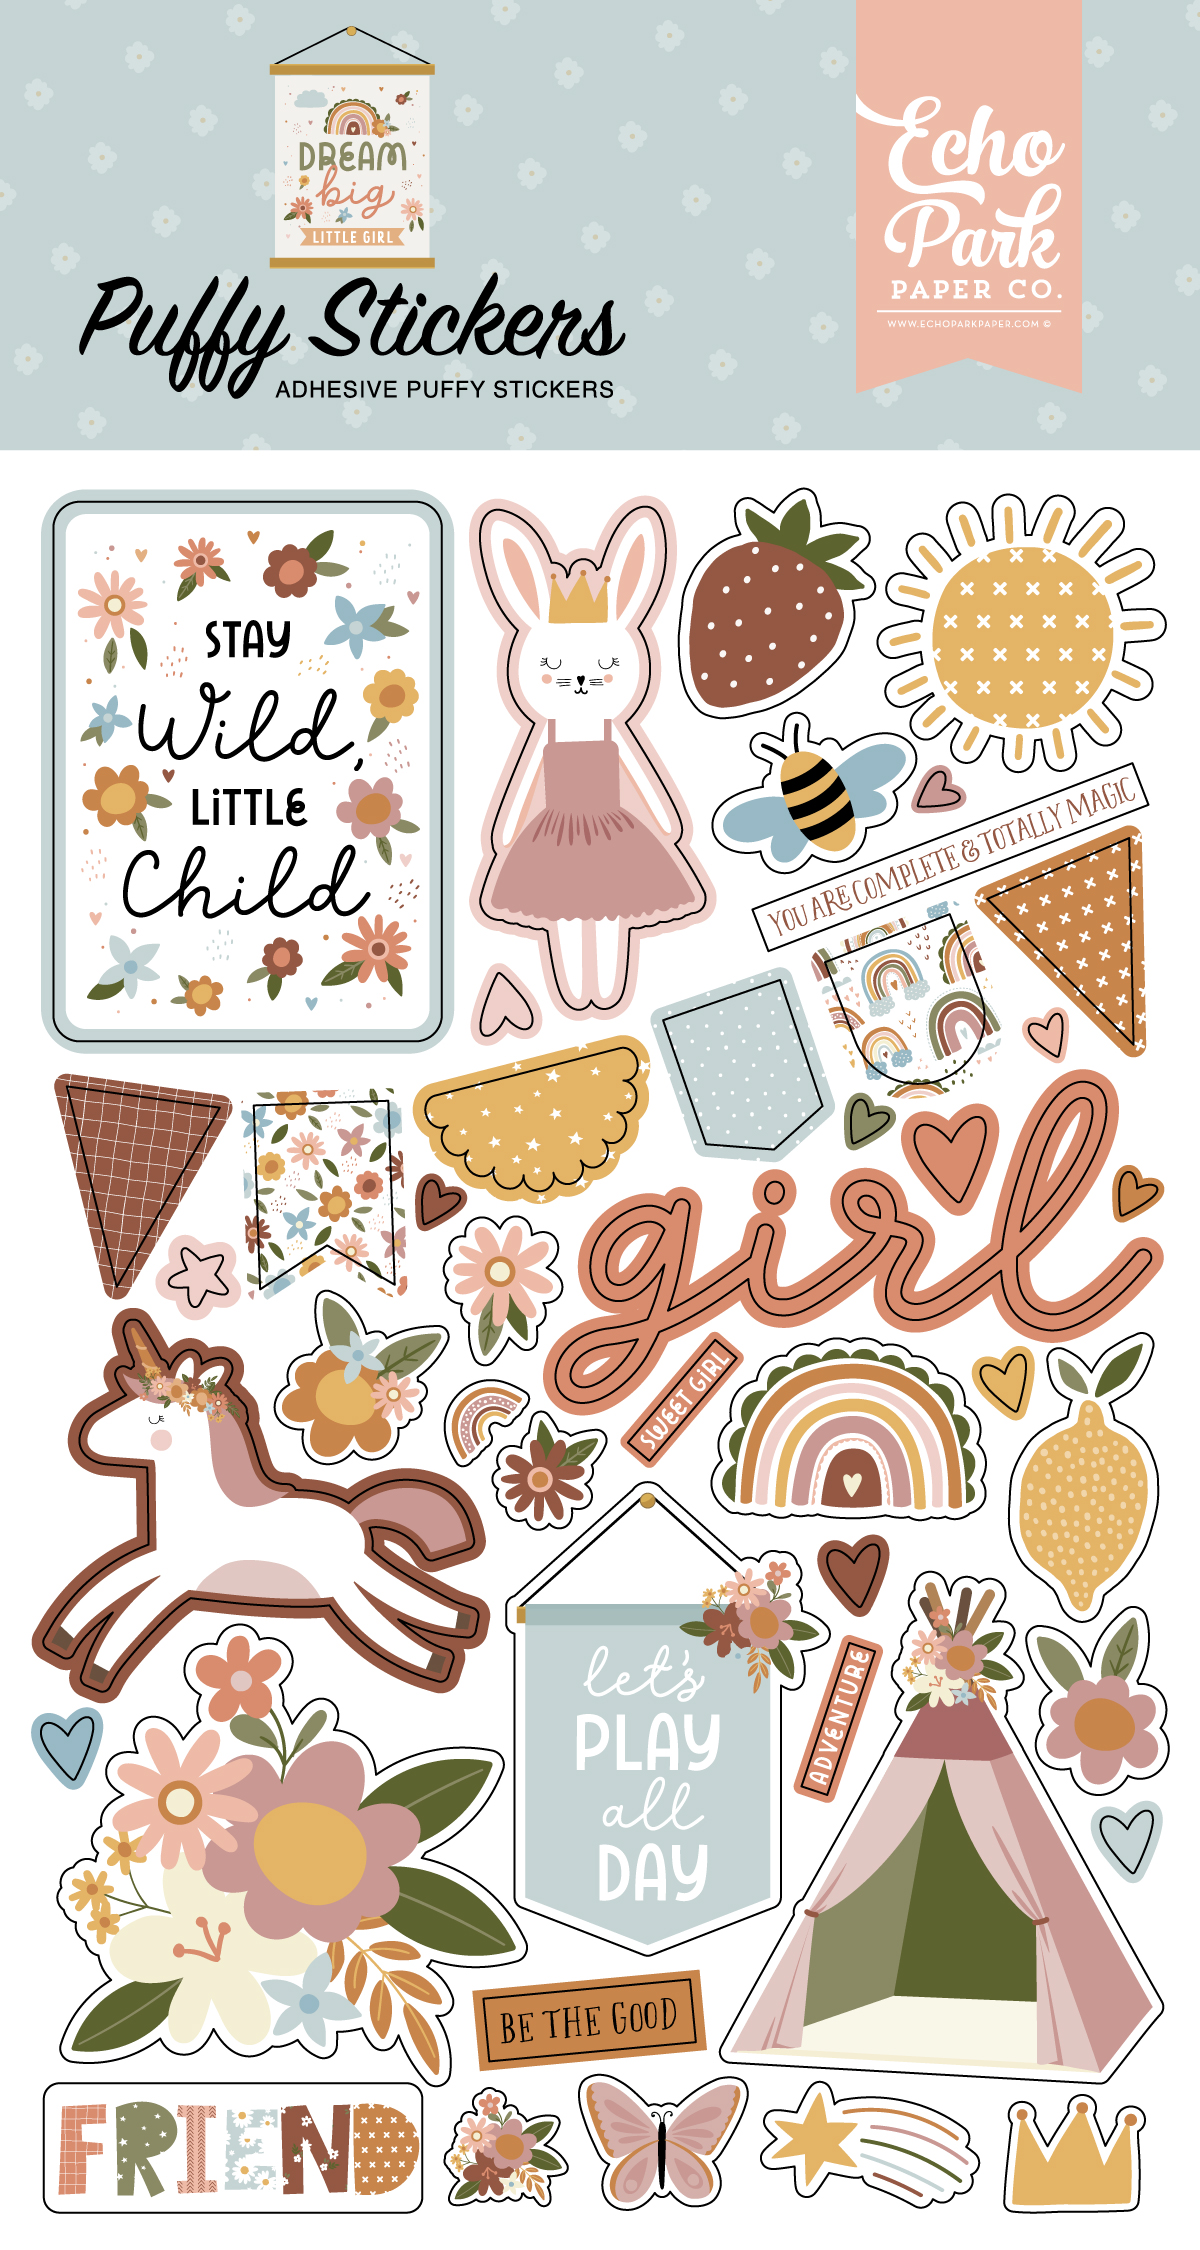 Play All Day Girl Sticker Book - Pebbles In My Pocket